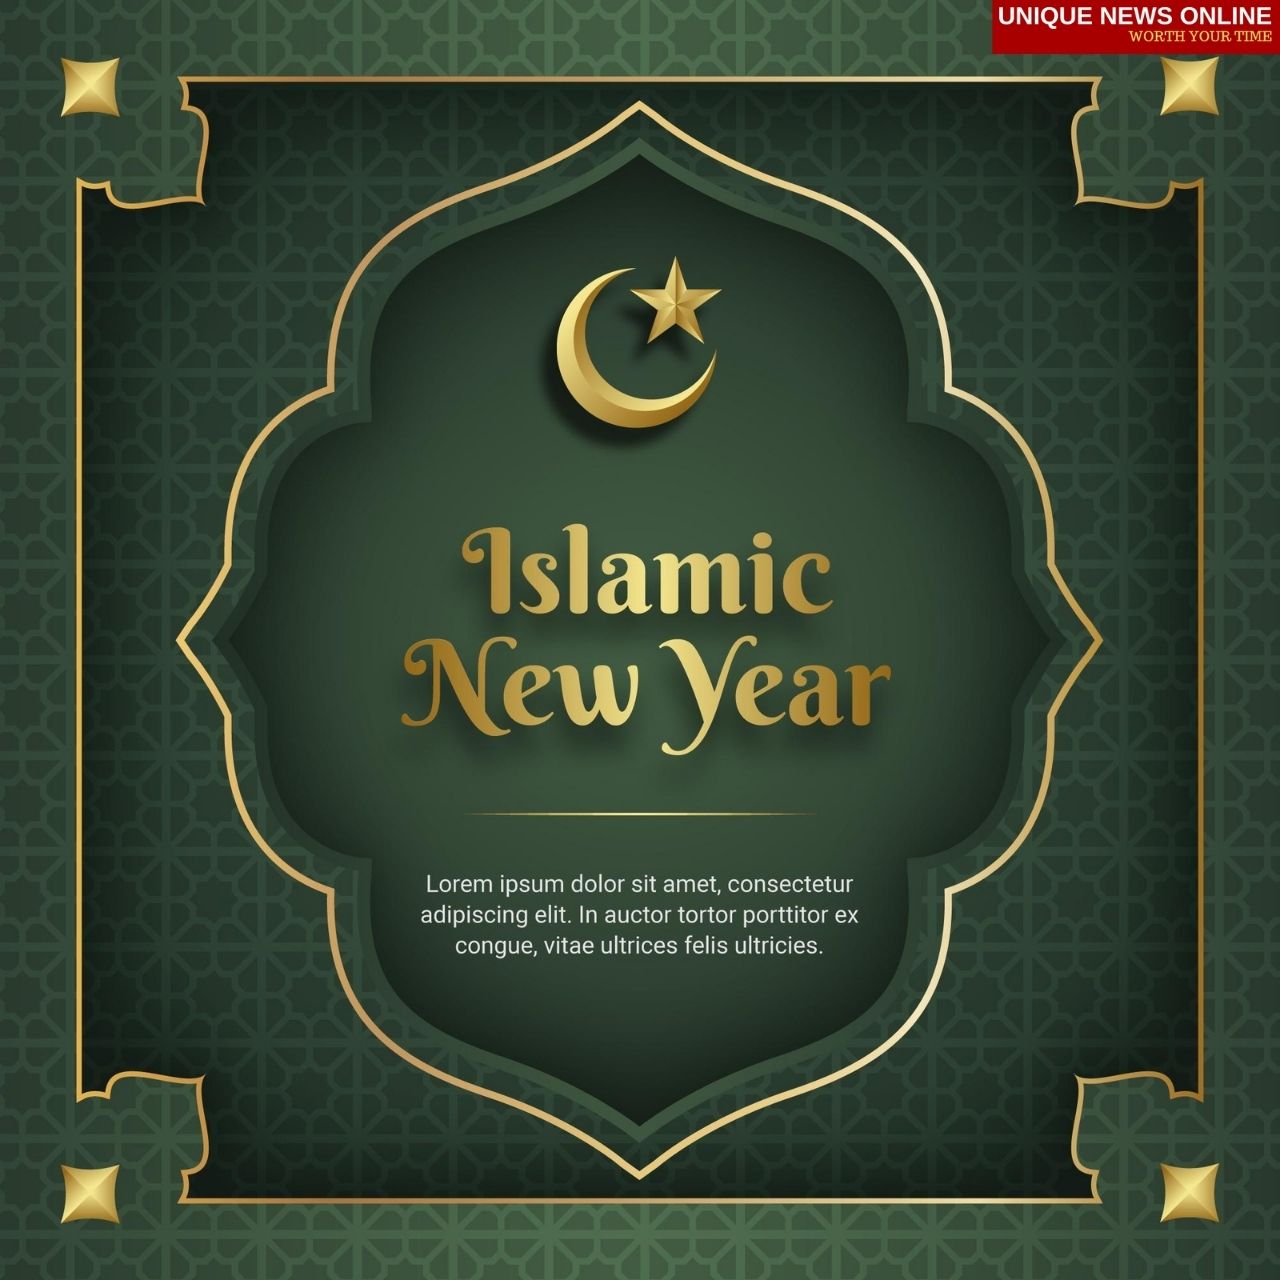 Islamic New Year 2021 Status and Wishes: Greetings, Messages, Quotes, HD Images, and Shayari to greet your Loved Ones